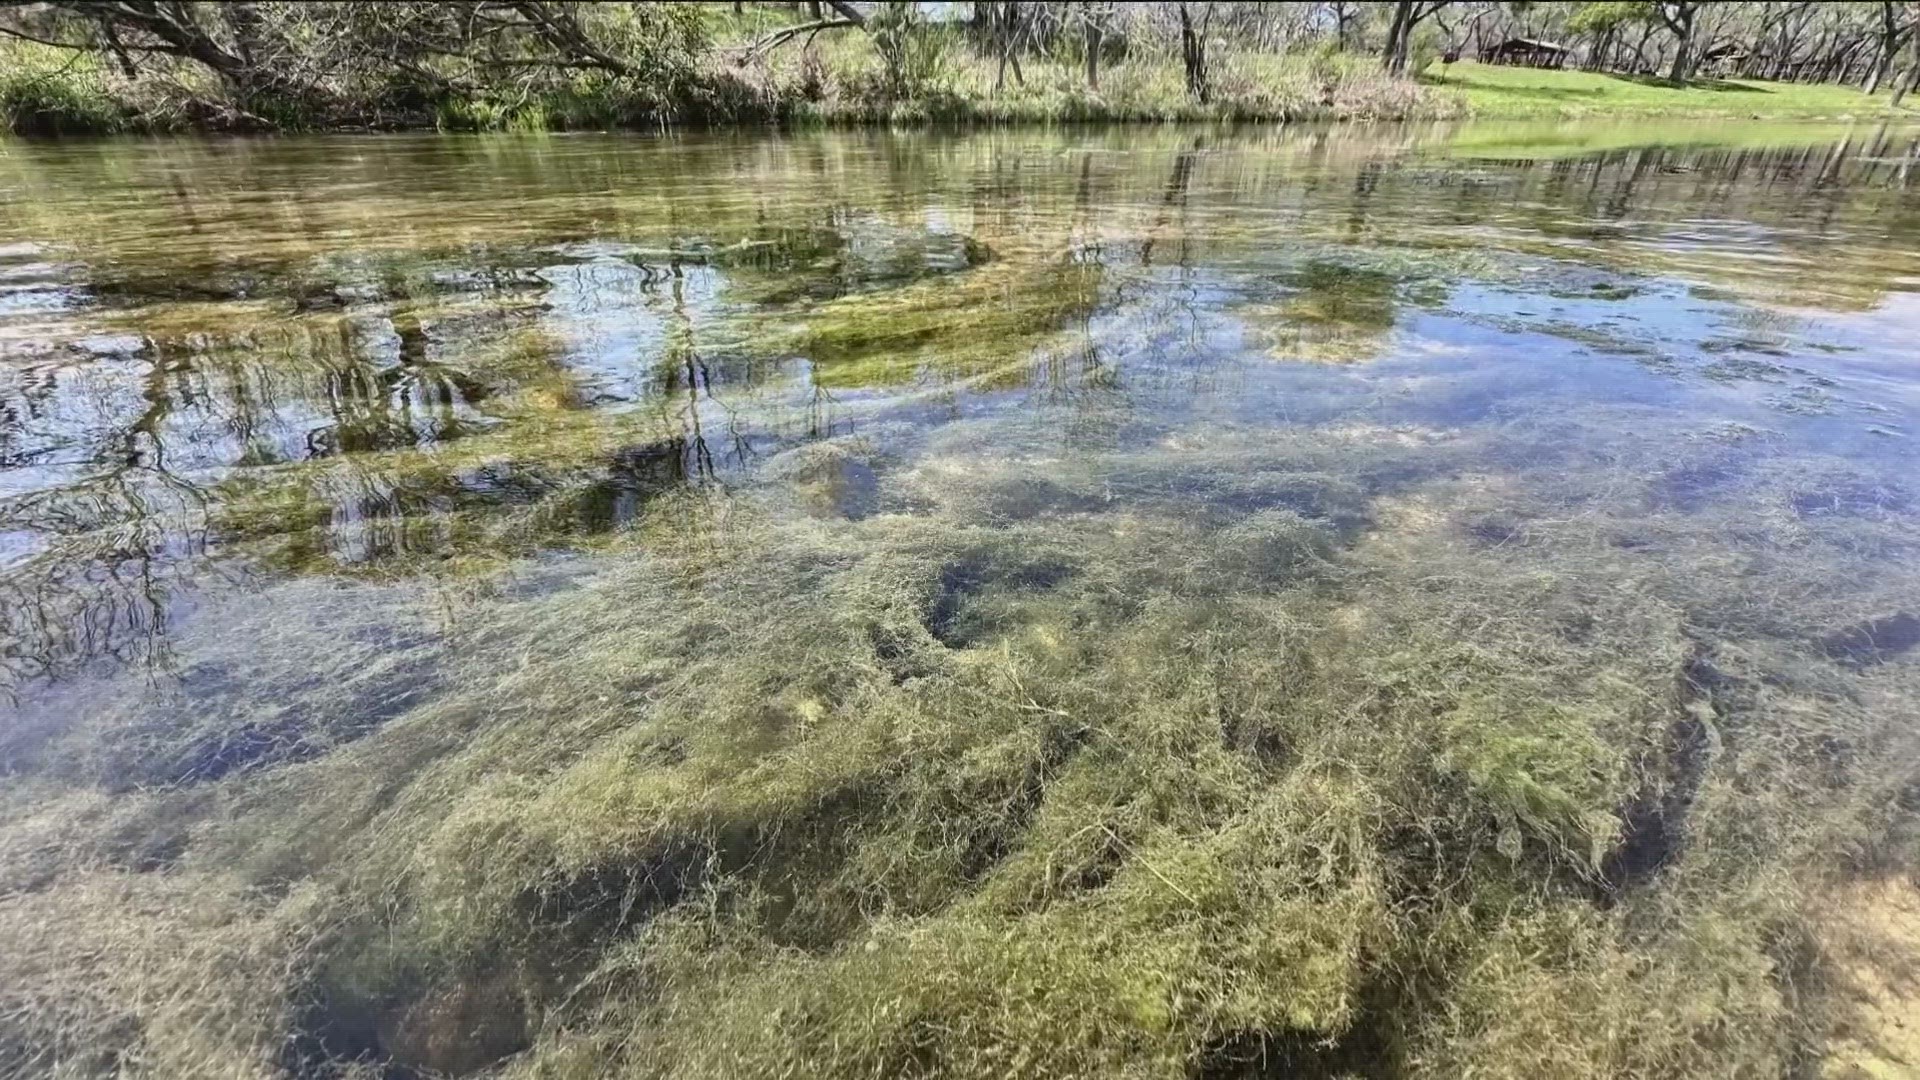 Algae overgrowth is at the center of a years-long dispute between some Williamson County homeowners and the city of Liberty Hill.